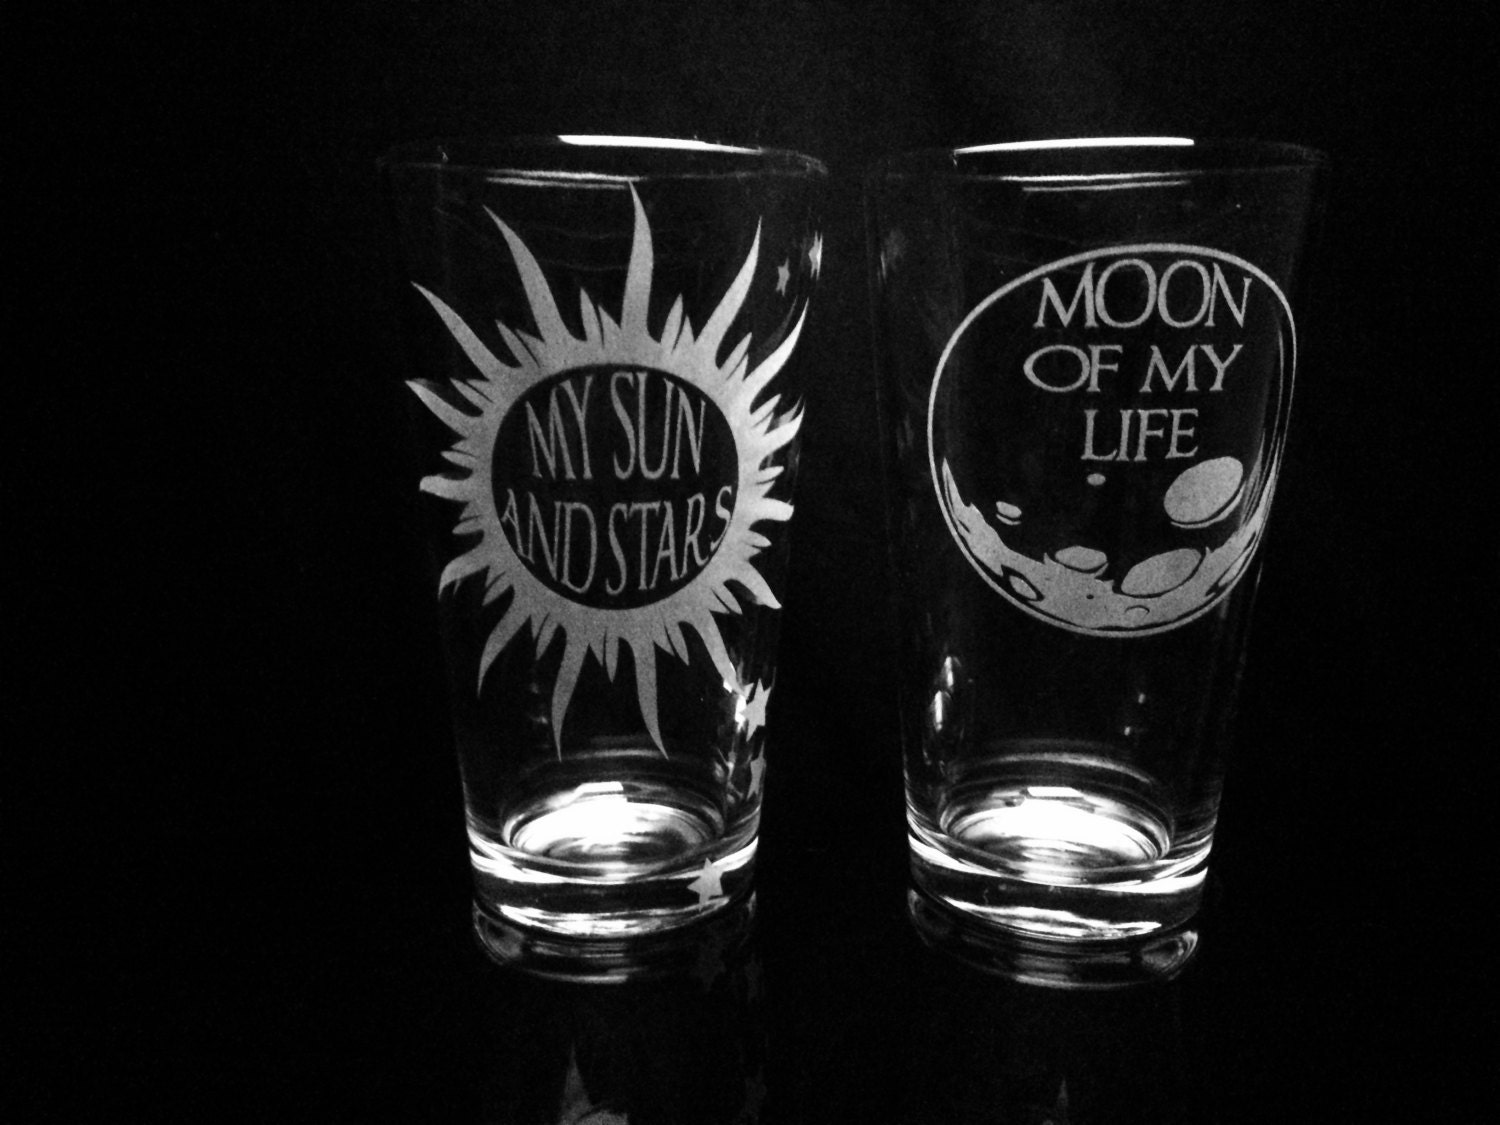 Game of Thrones Inspired Quote My Sun and Stars Moon of My | Etsy